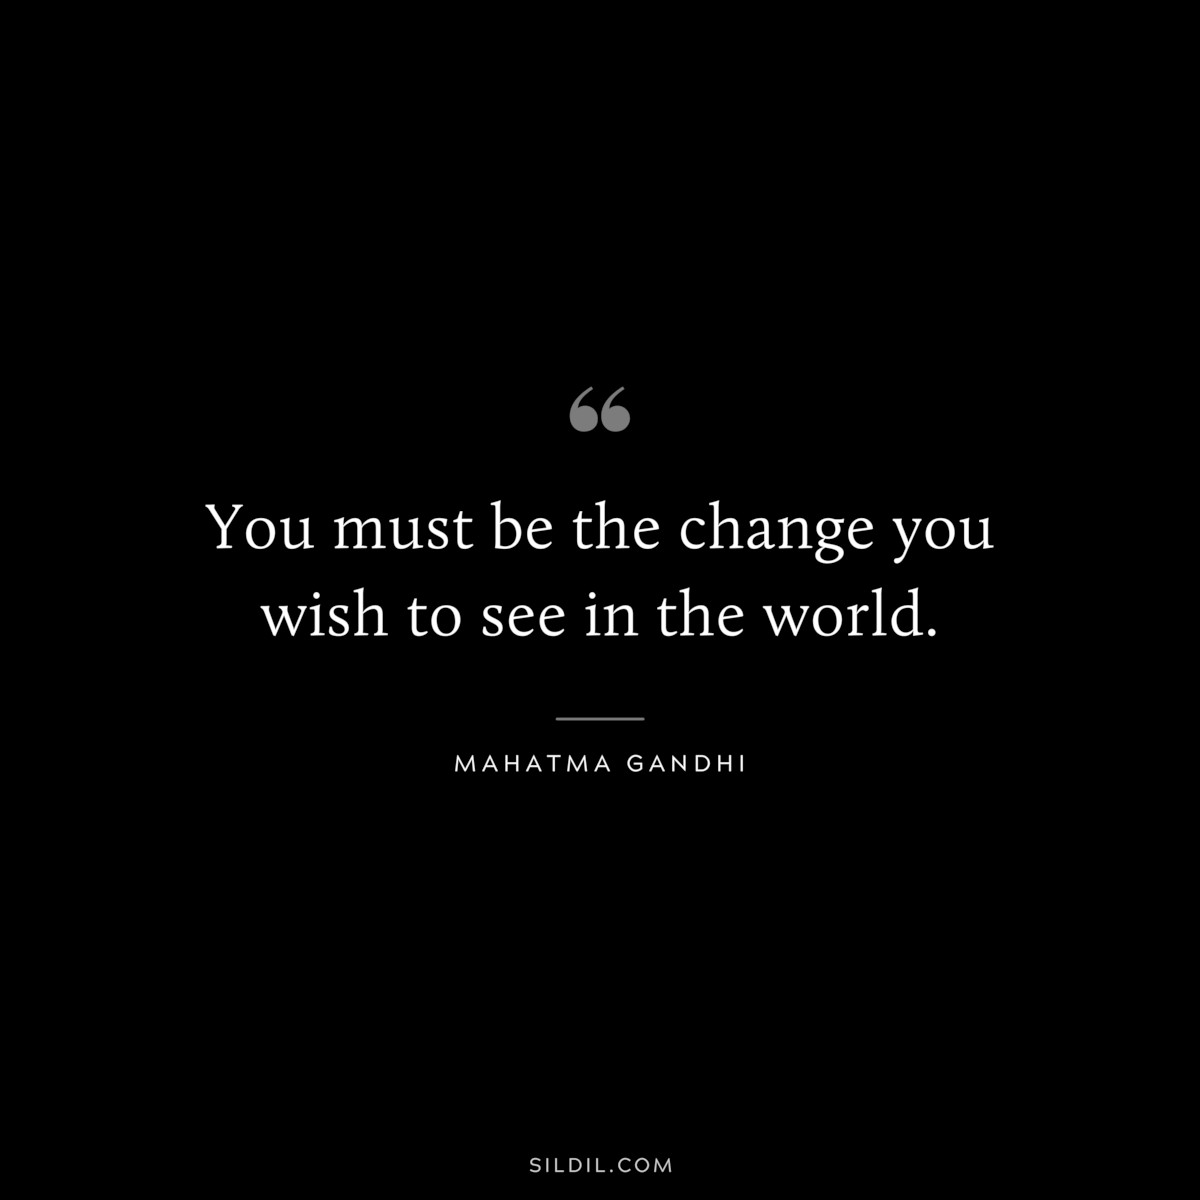 You must be the change you wish to see in the world. ― Mahatma Gandhi